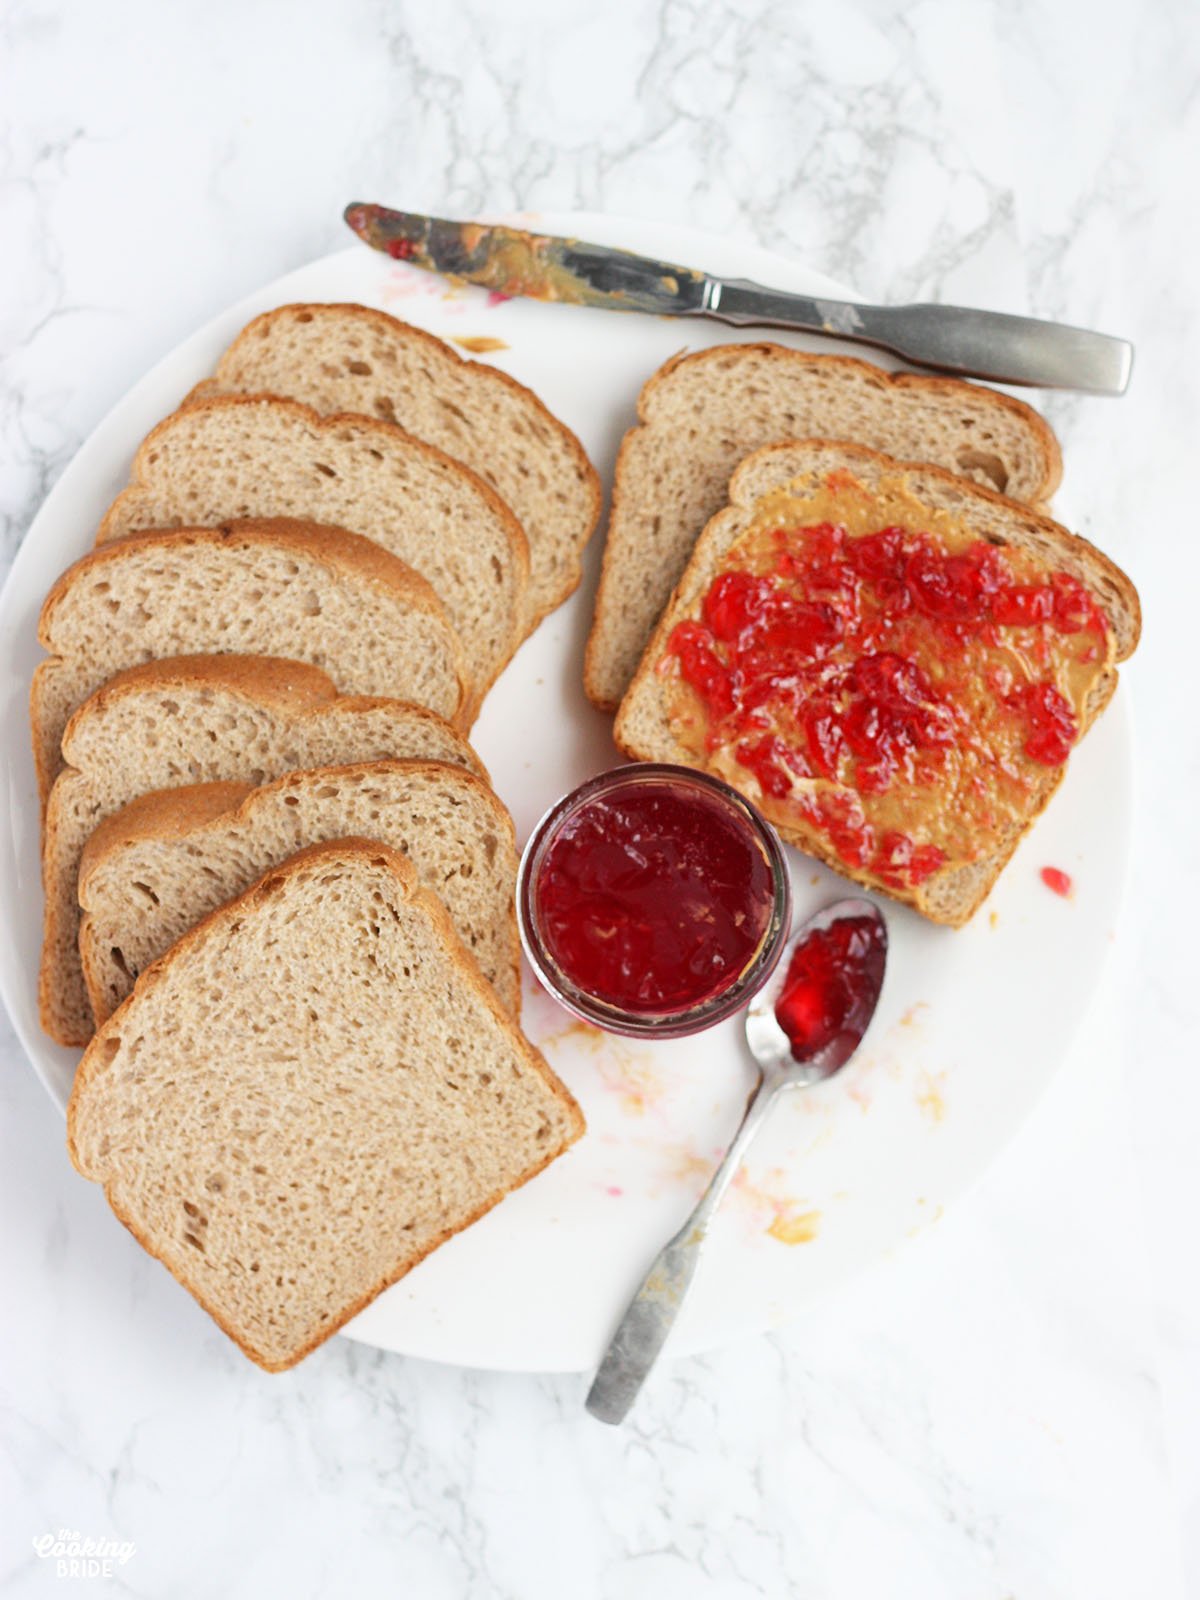 plate of sliced bread with peanut butter and plum jelly